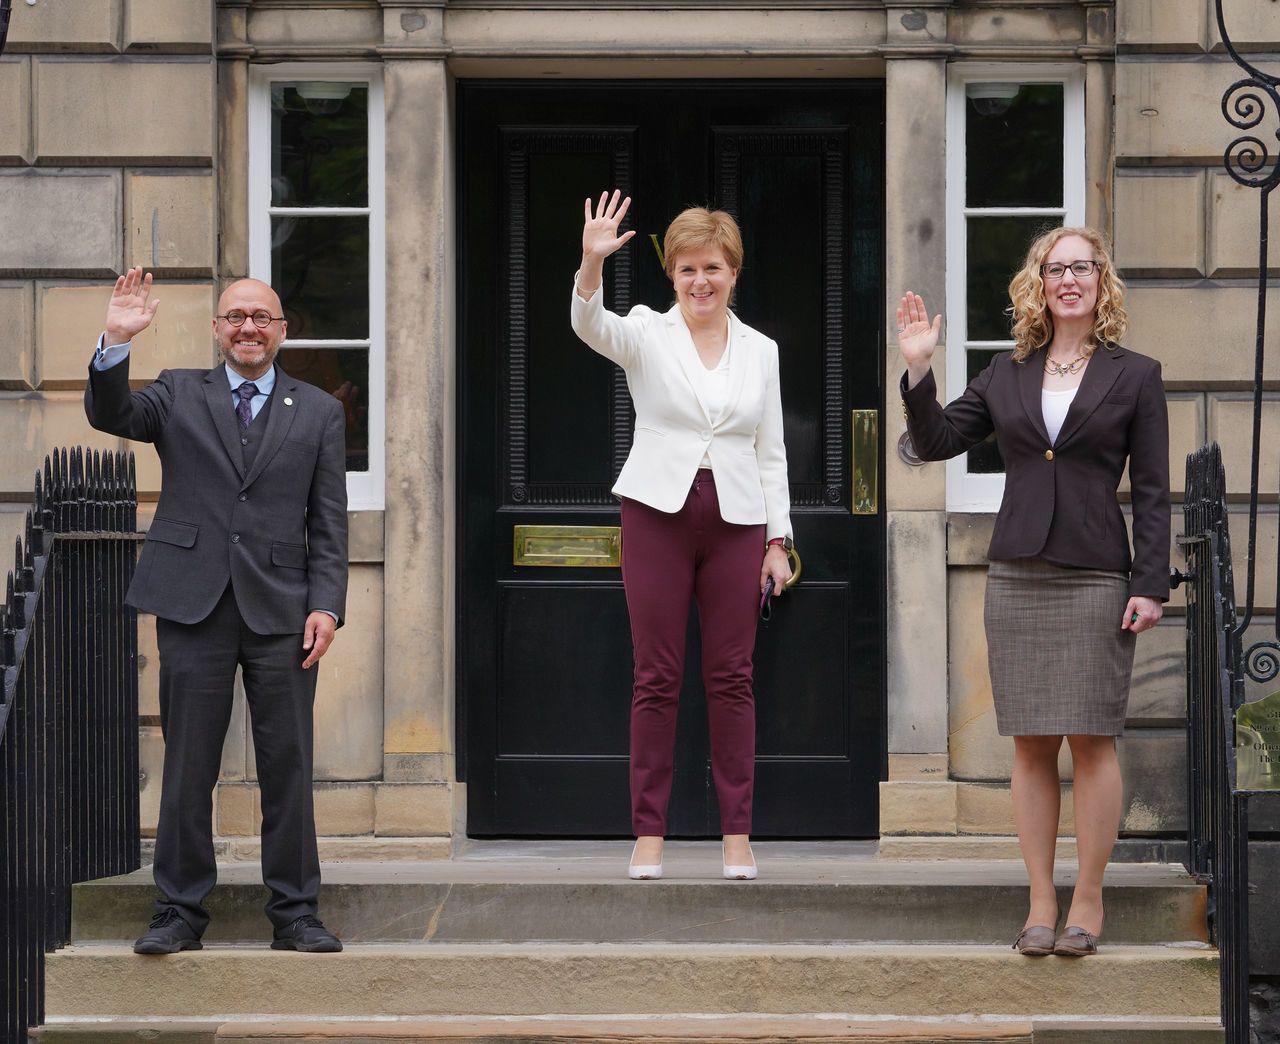 The deal will see Patrick Harvie and Lorna Slater become ministers.